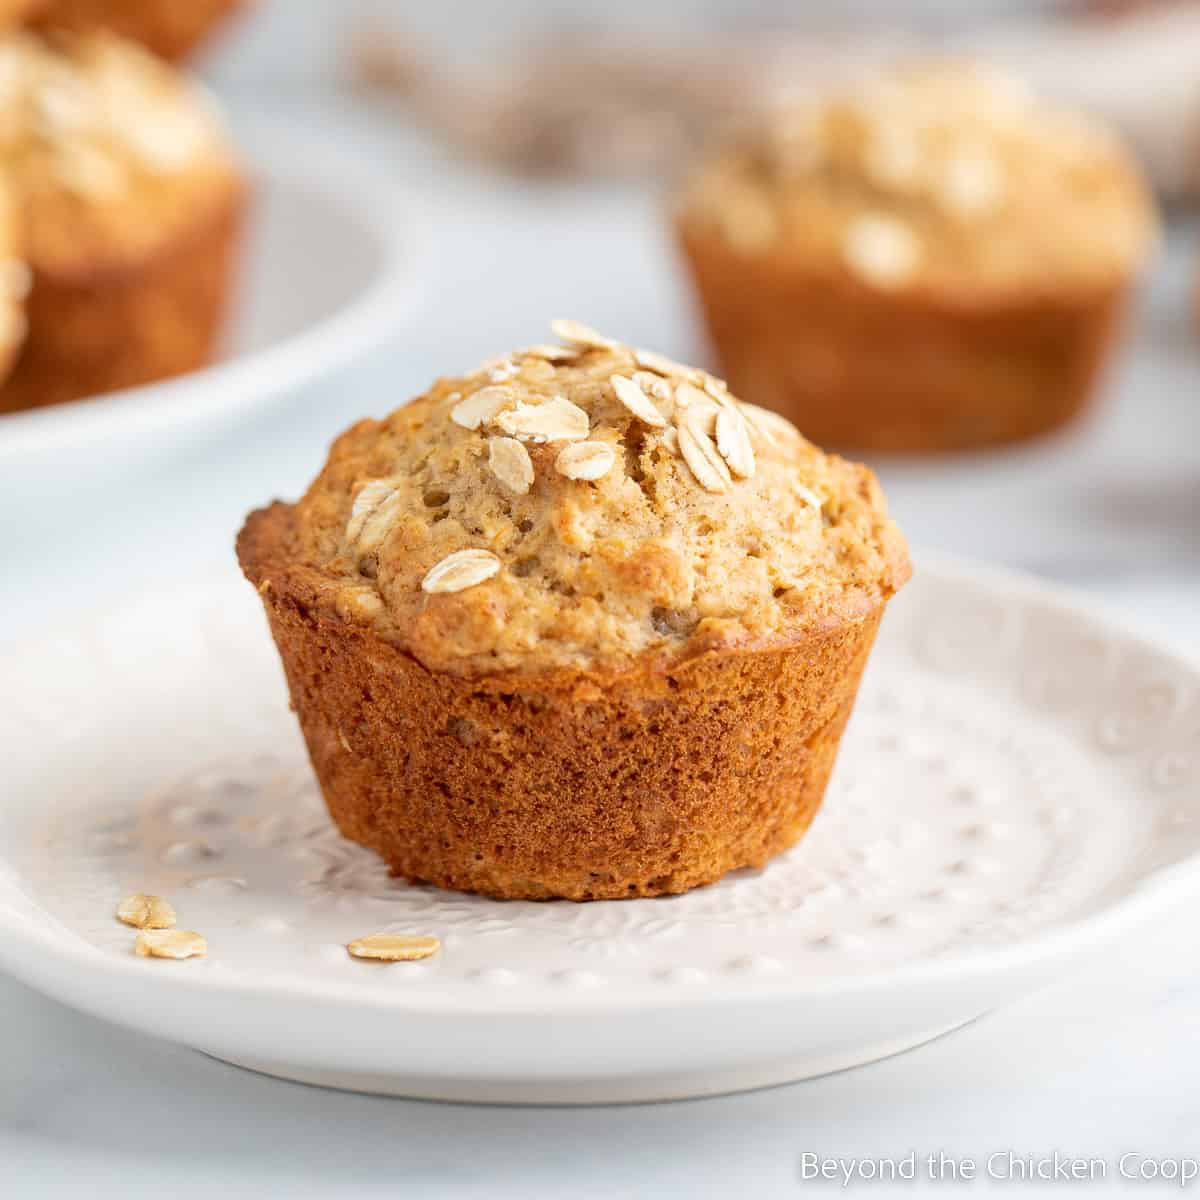 A muffin topped with oats on a white plate.